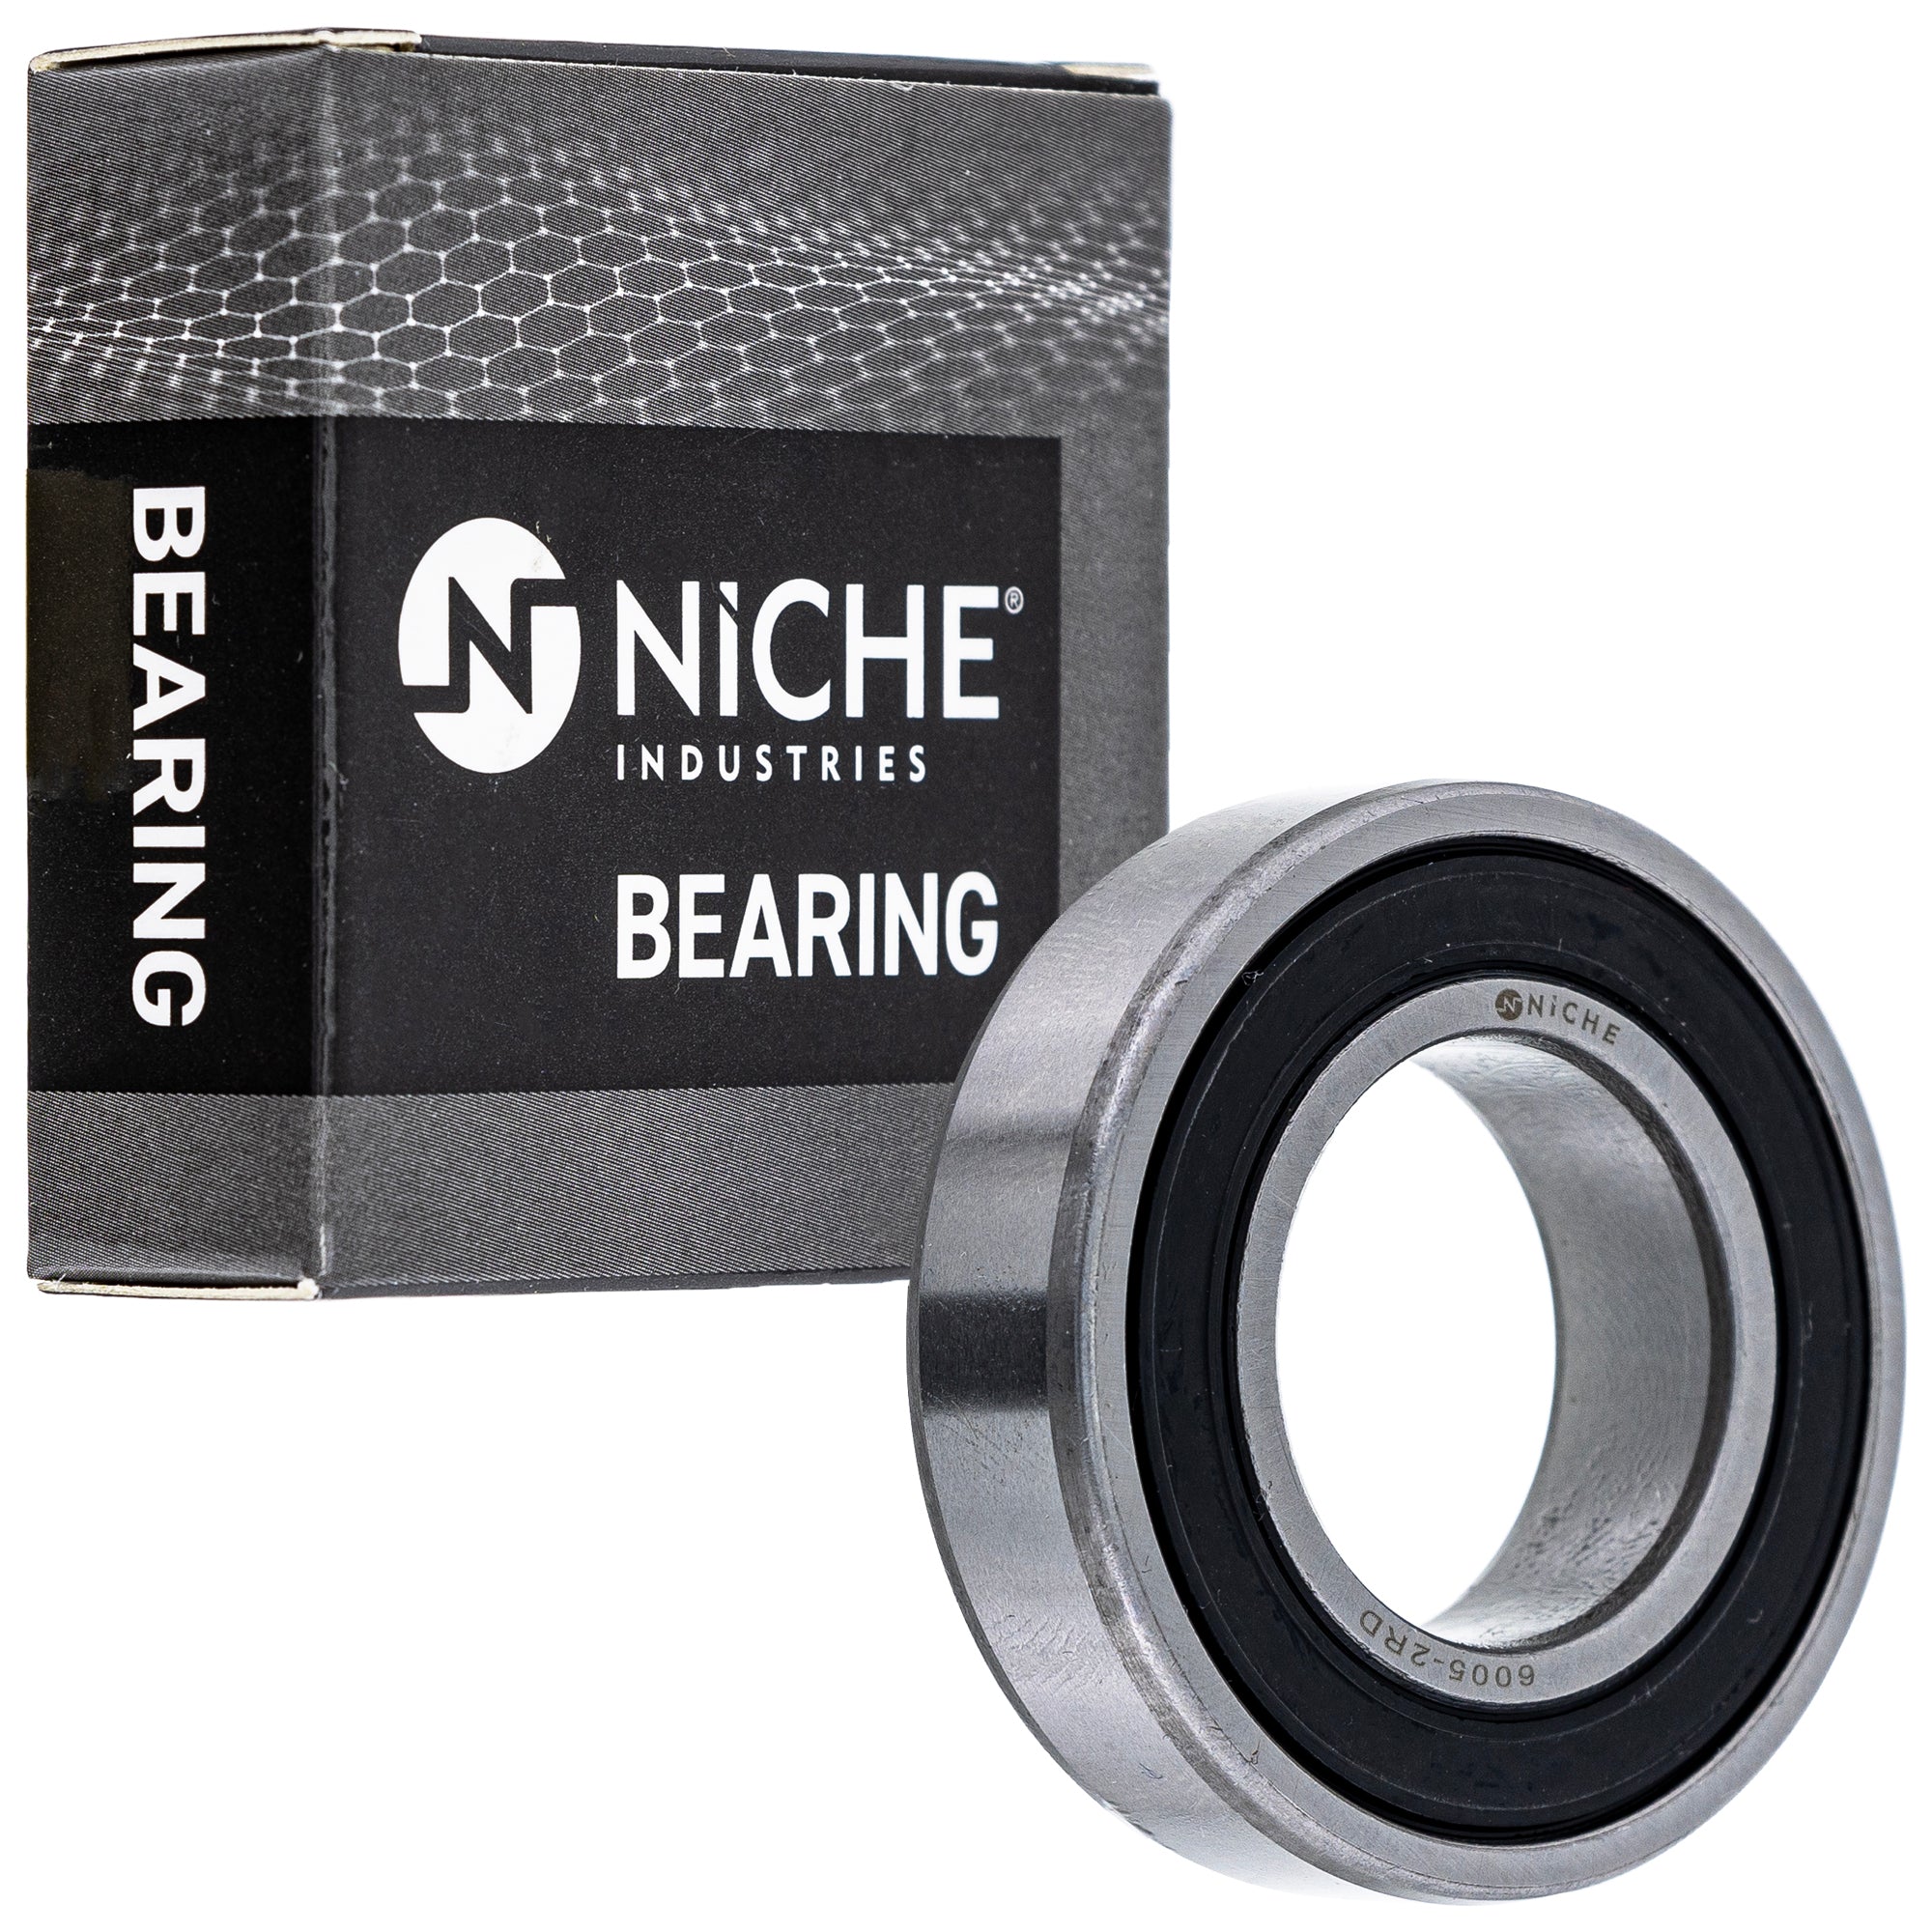 NICHE 519-CBB2339R Bearing 10-Pack for zOTHER RVT1000R RC51 Rancher